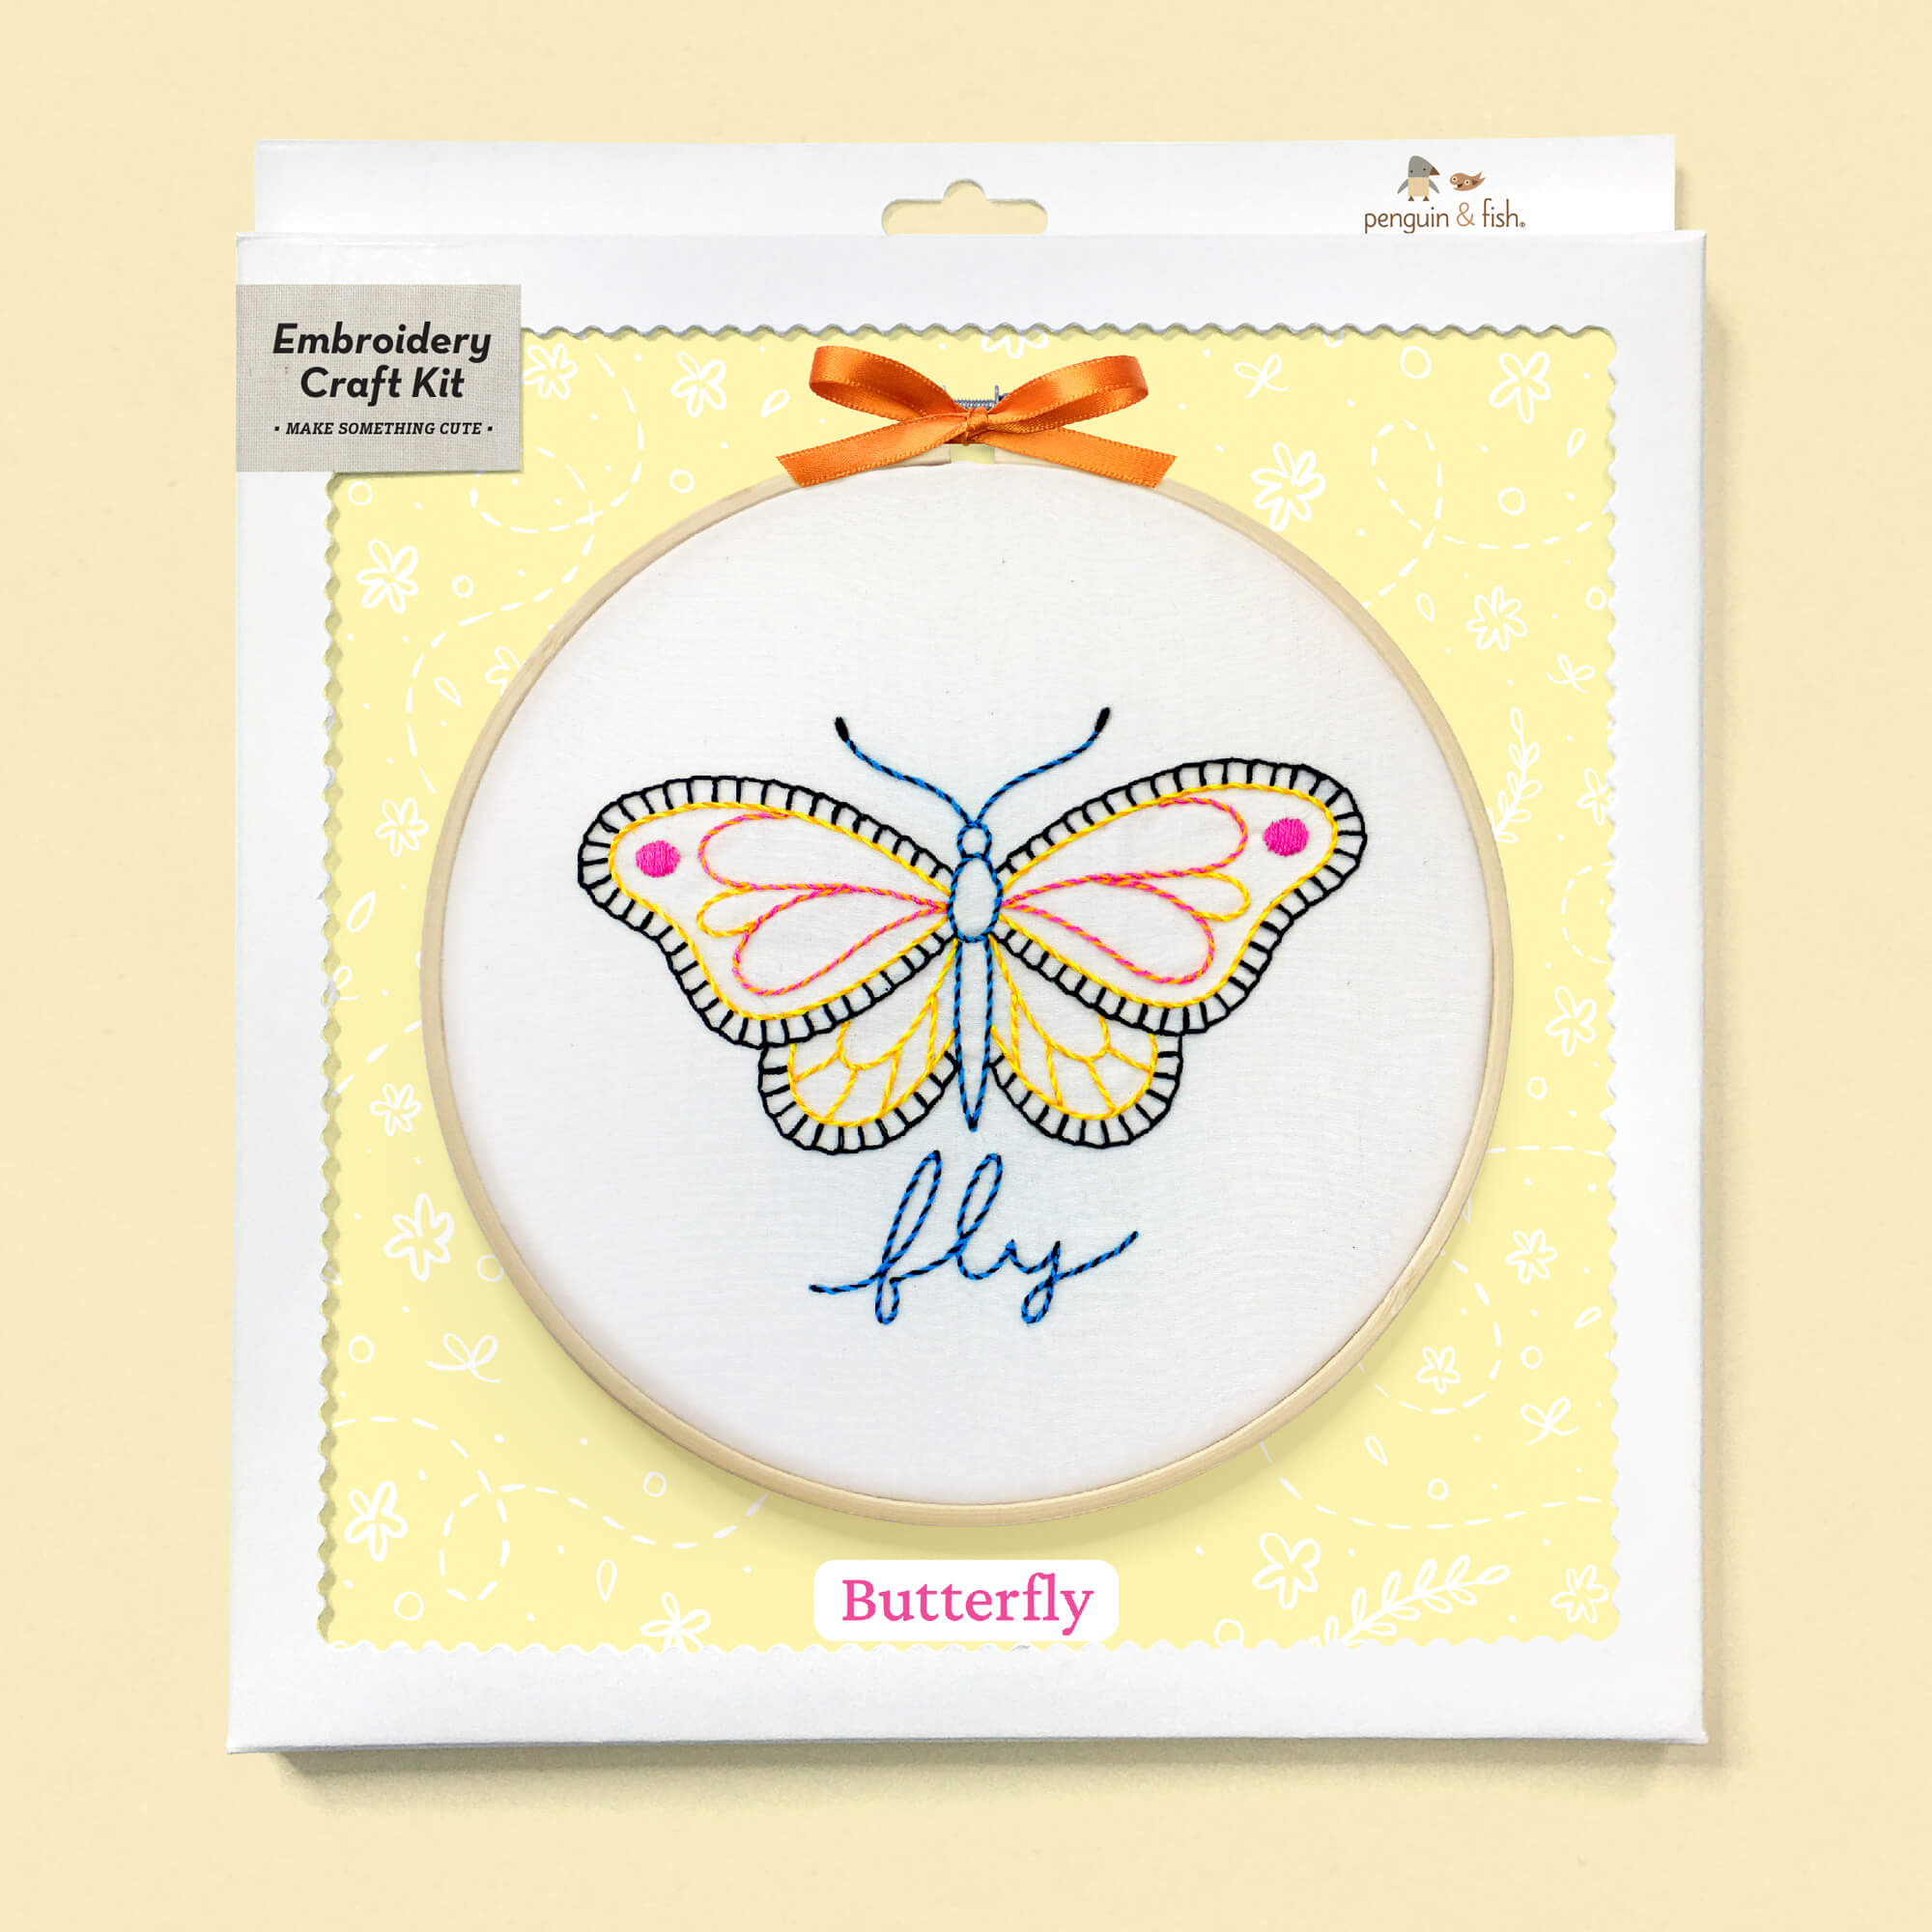 Butterfly embroidery kit in a box